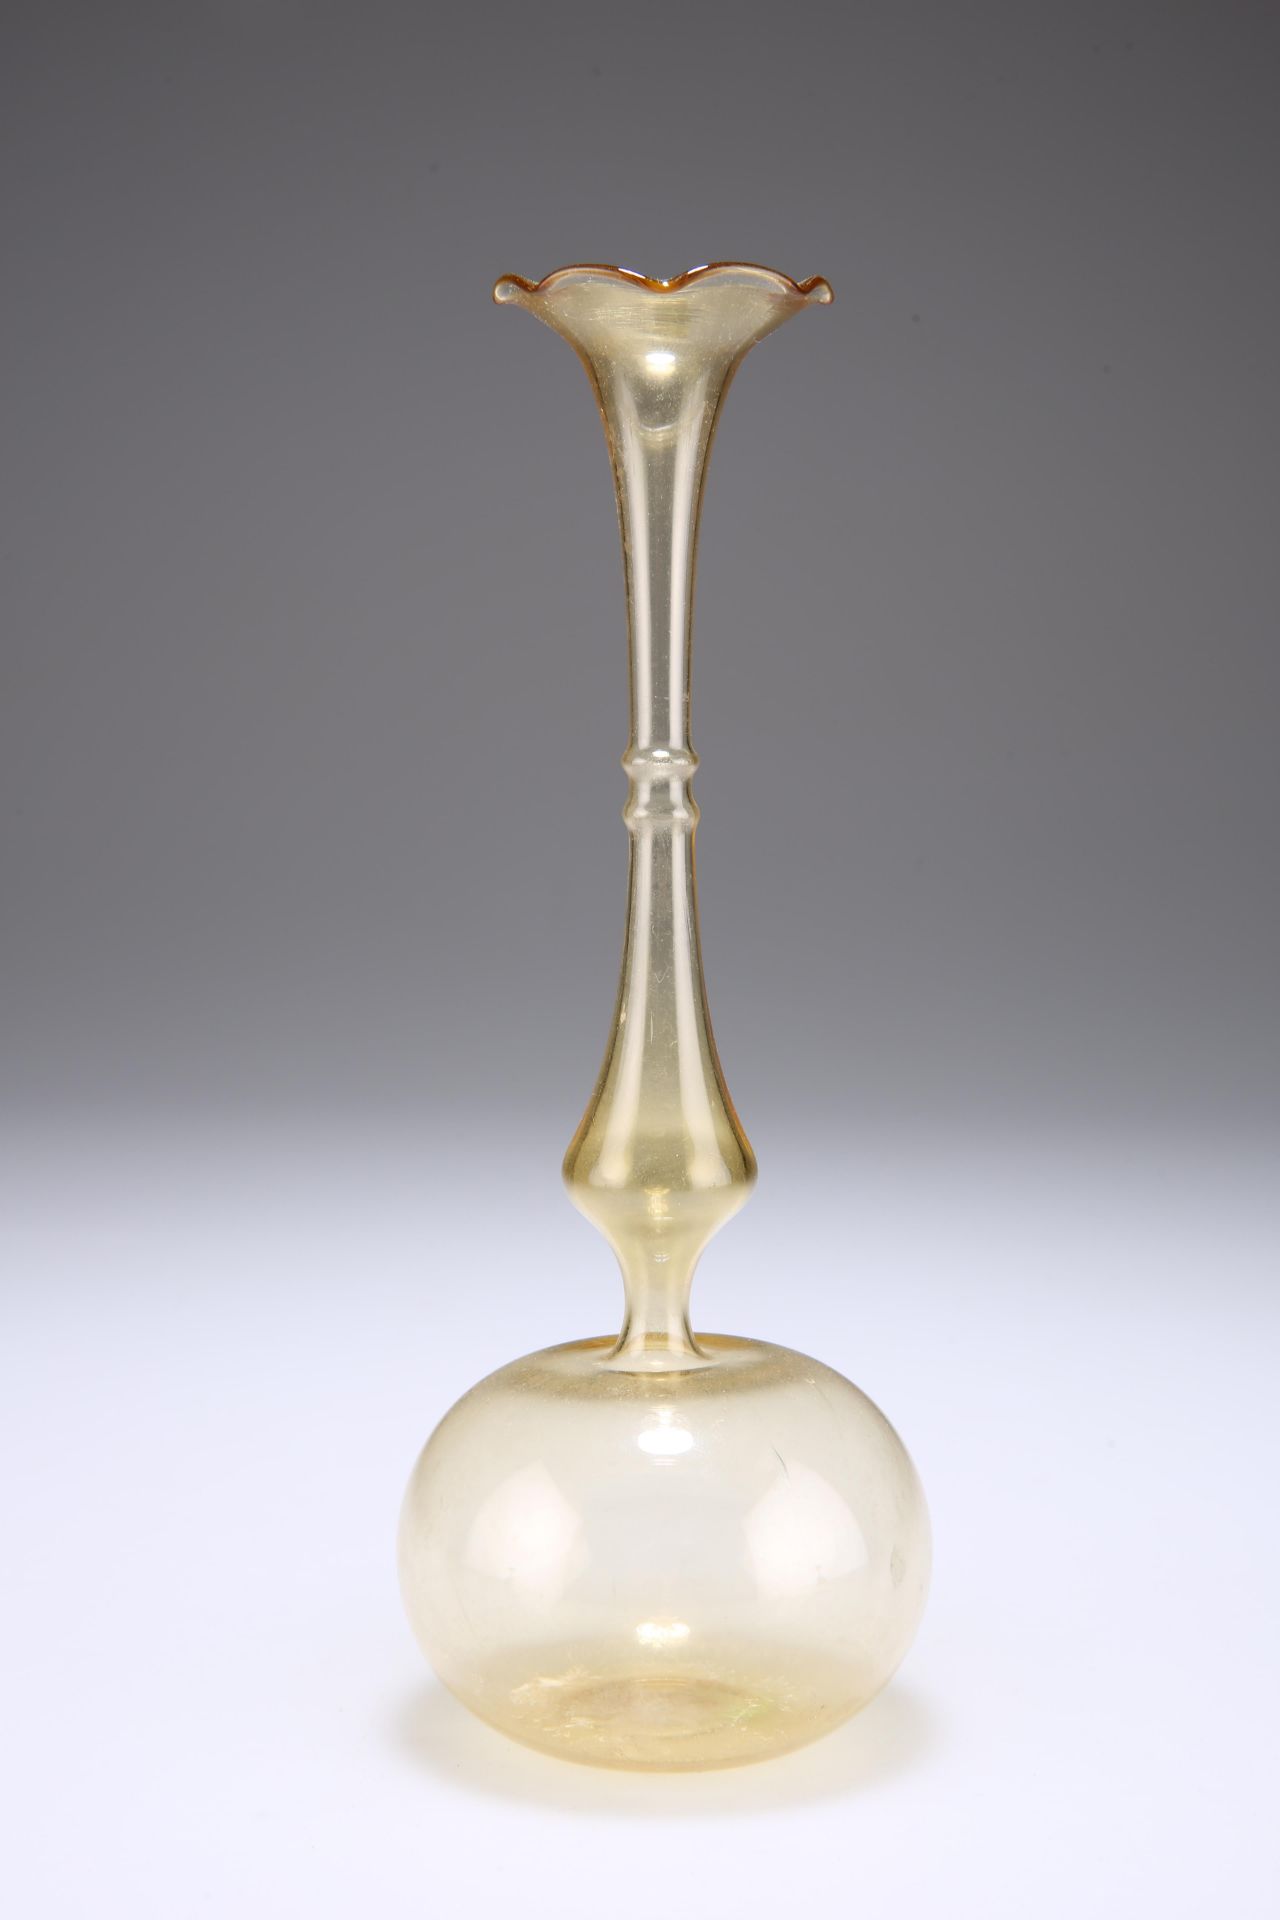 A LAUSCHA GLASS VASE, MID-20TH CENTURY